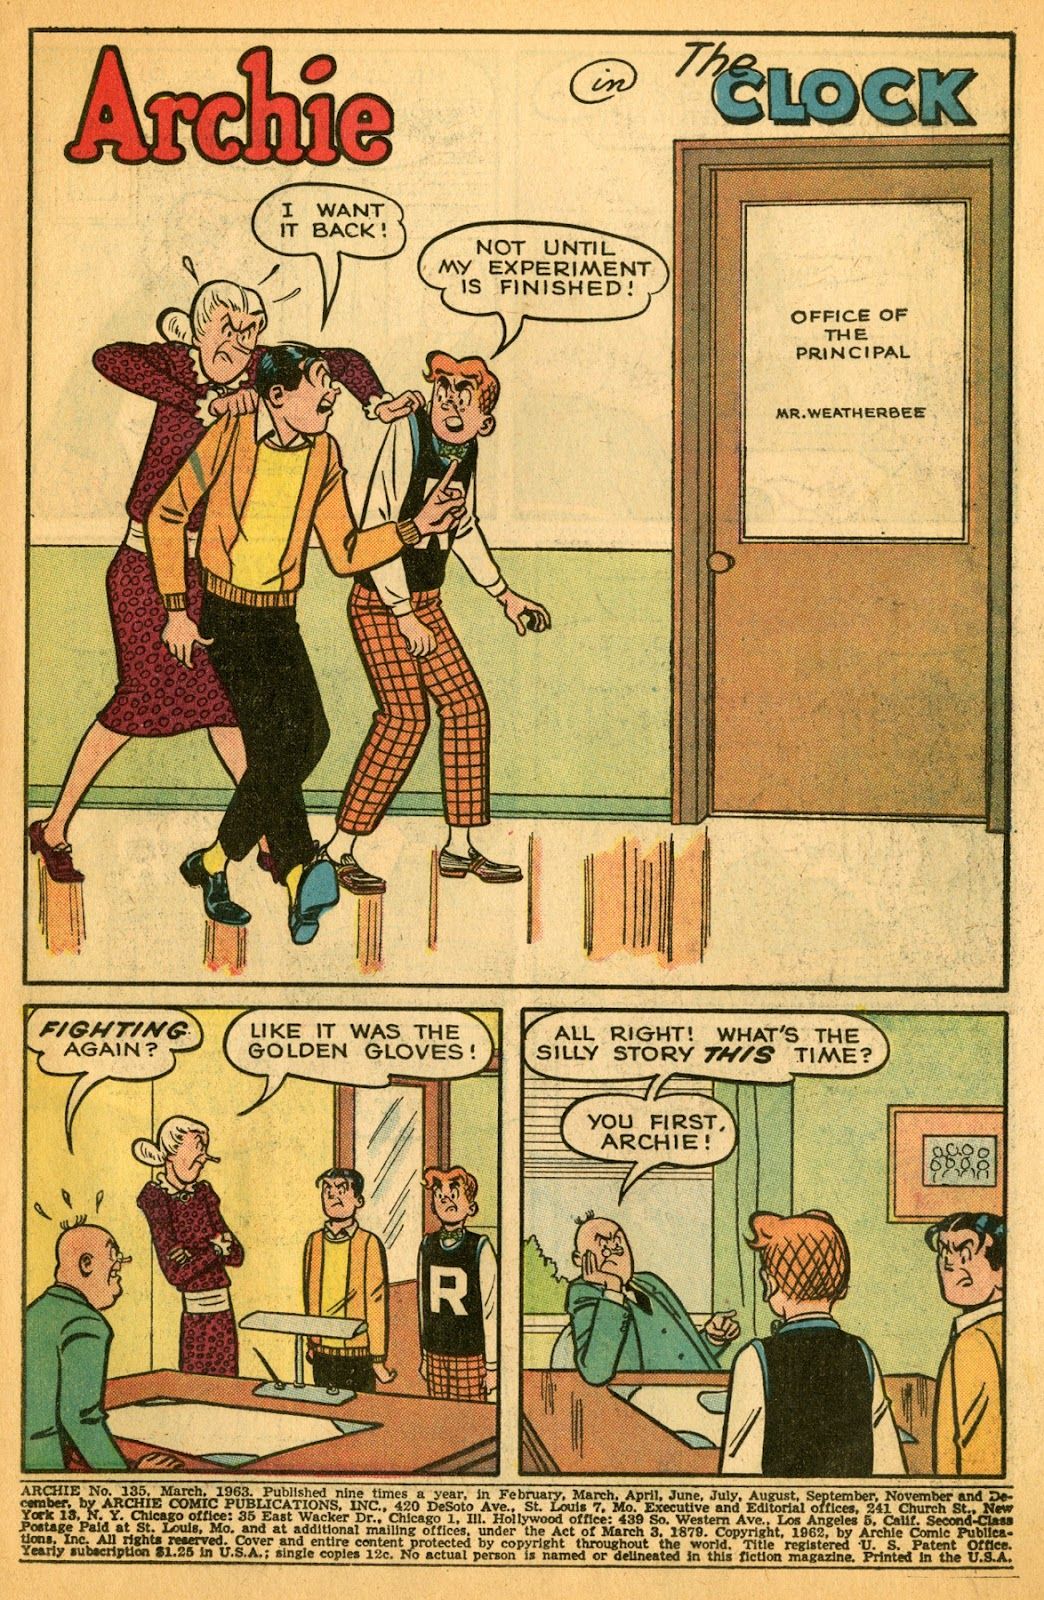 Archie #136 sees "The Clock"